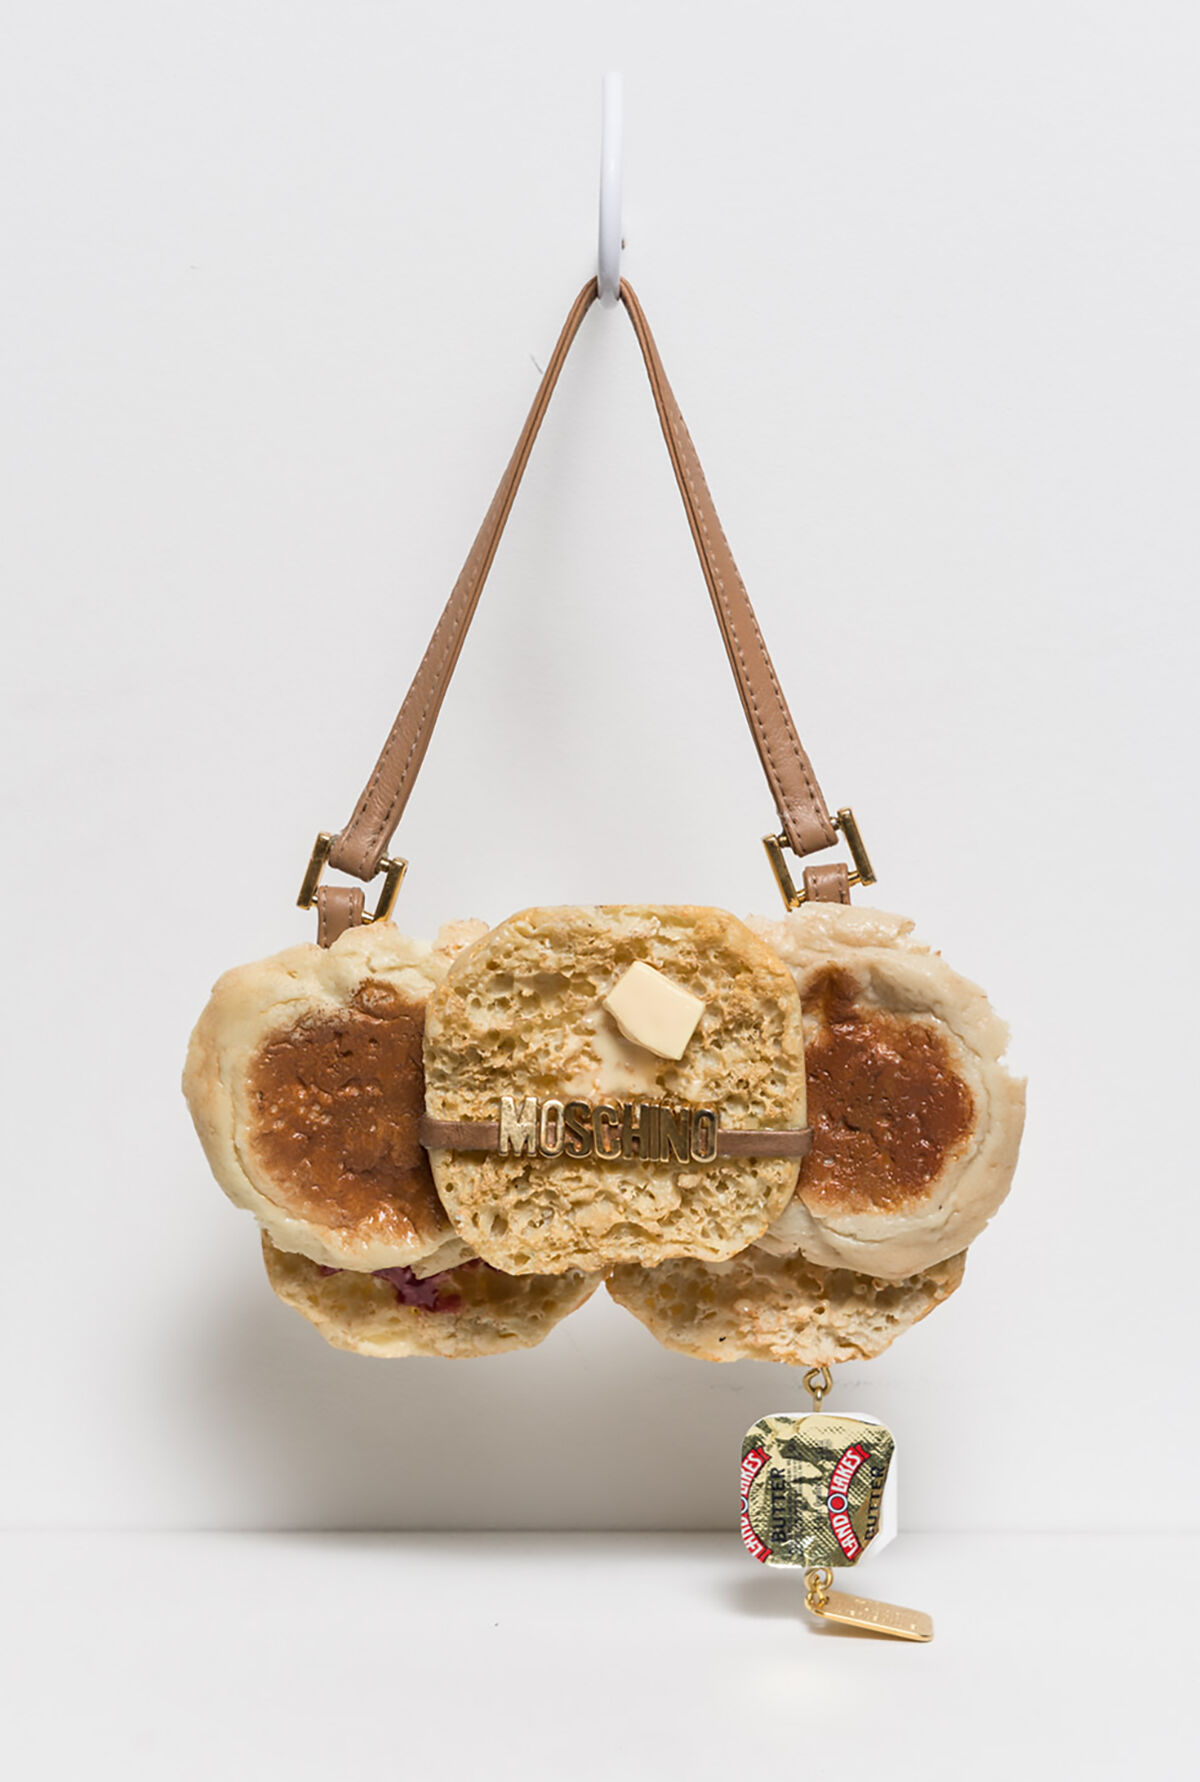 Chloe Wise, Moschino English Muffin, 2015. Photo by Paul Litherland. Courtesy of the artist and Blouin Division.